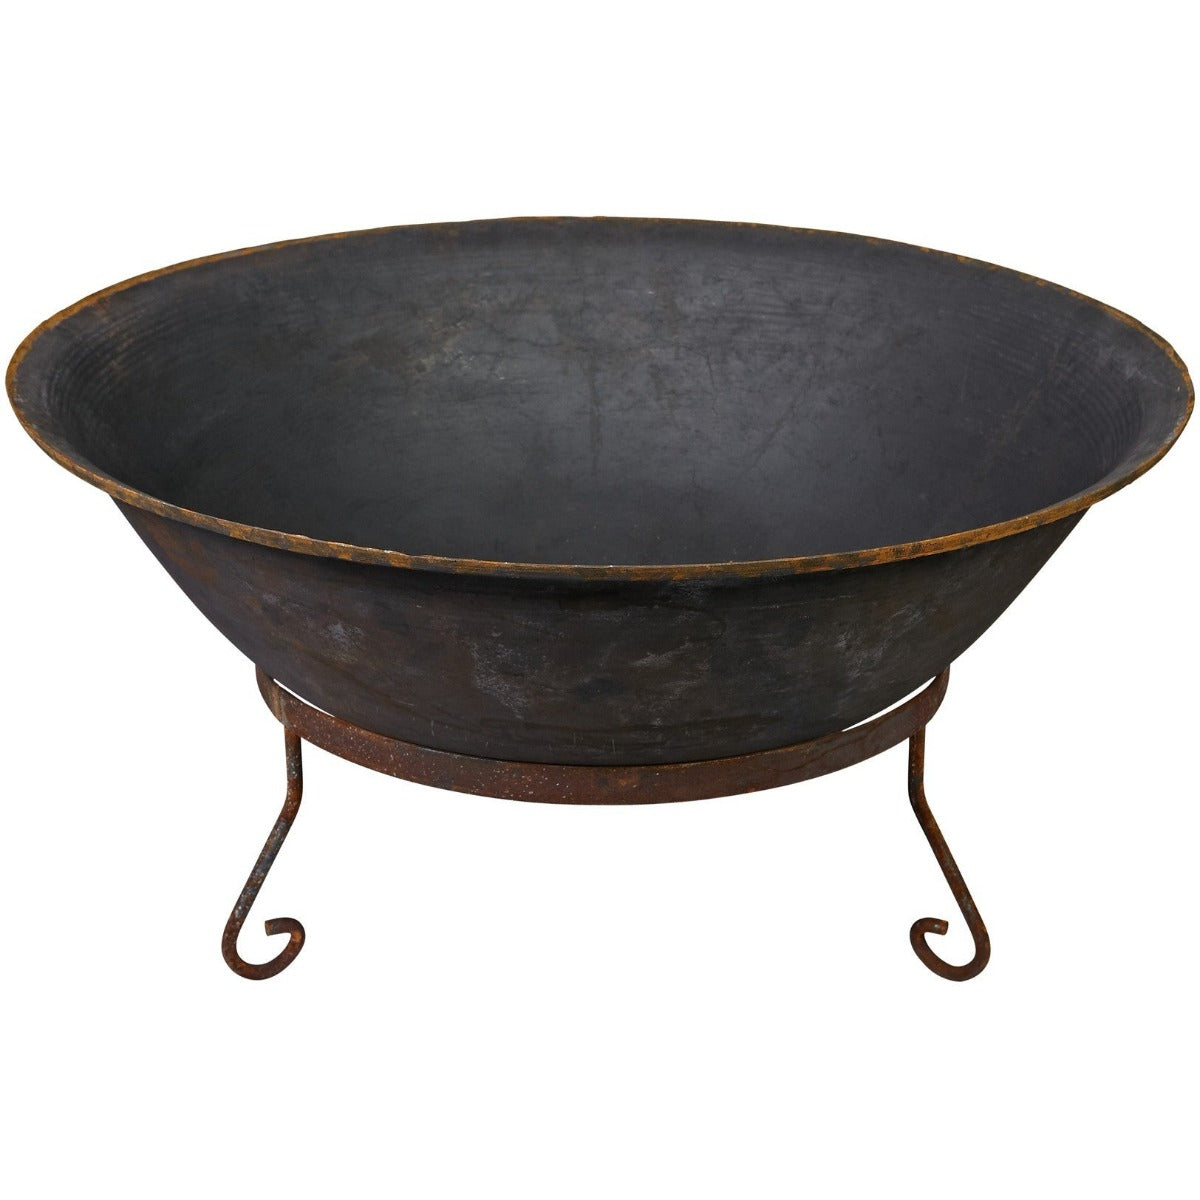 120cm Cast Iron Fire Pit Bowl with Stand - Razzino Furniture